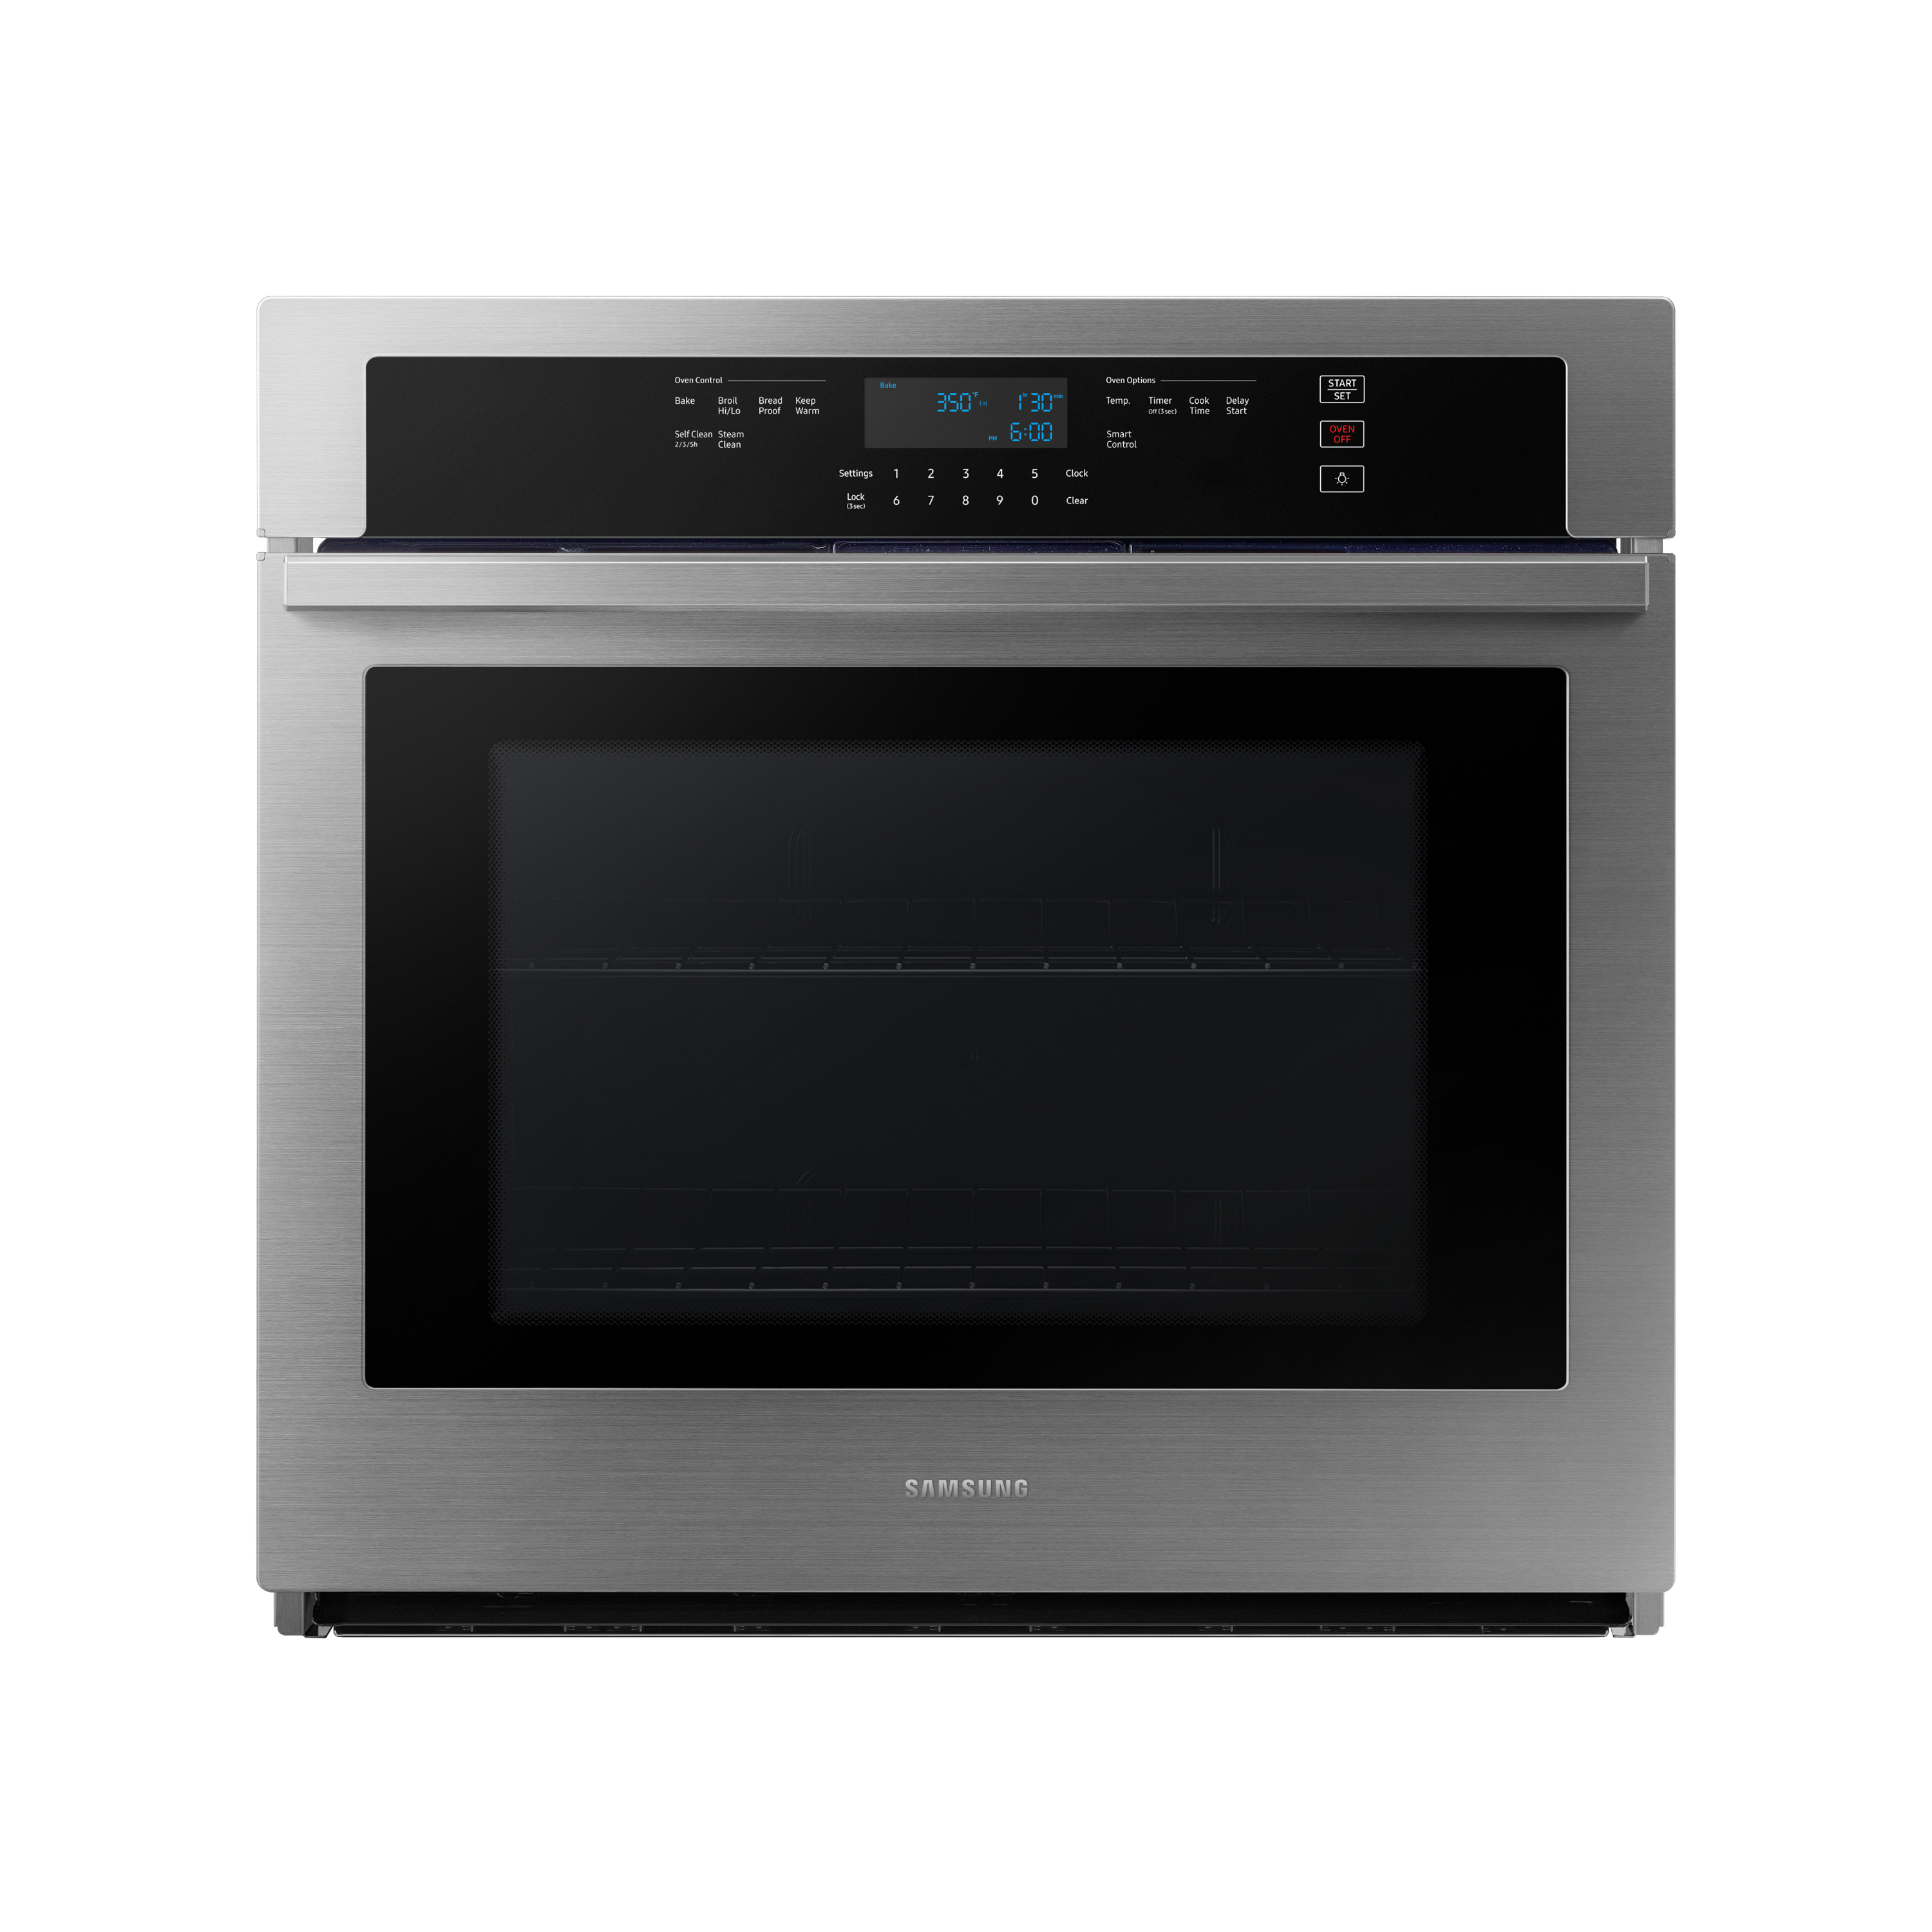 Samsung 30" Stainless Steel Electric Built In Single Oven